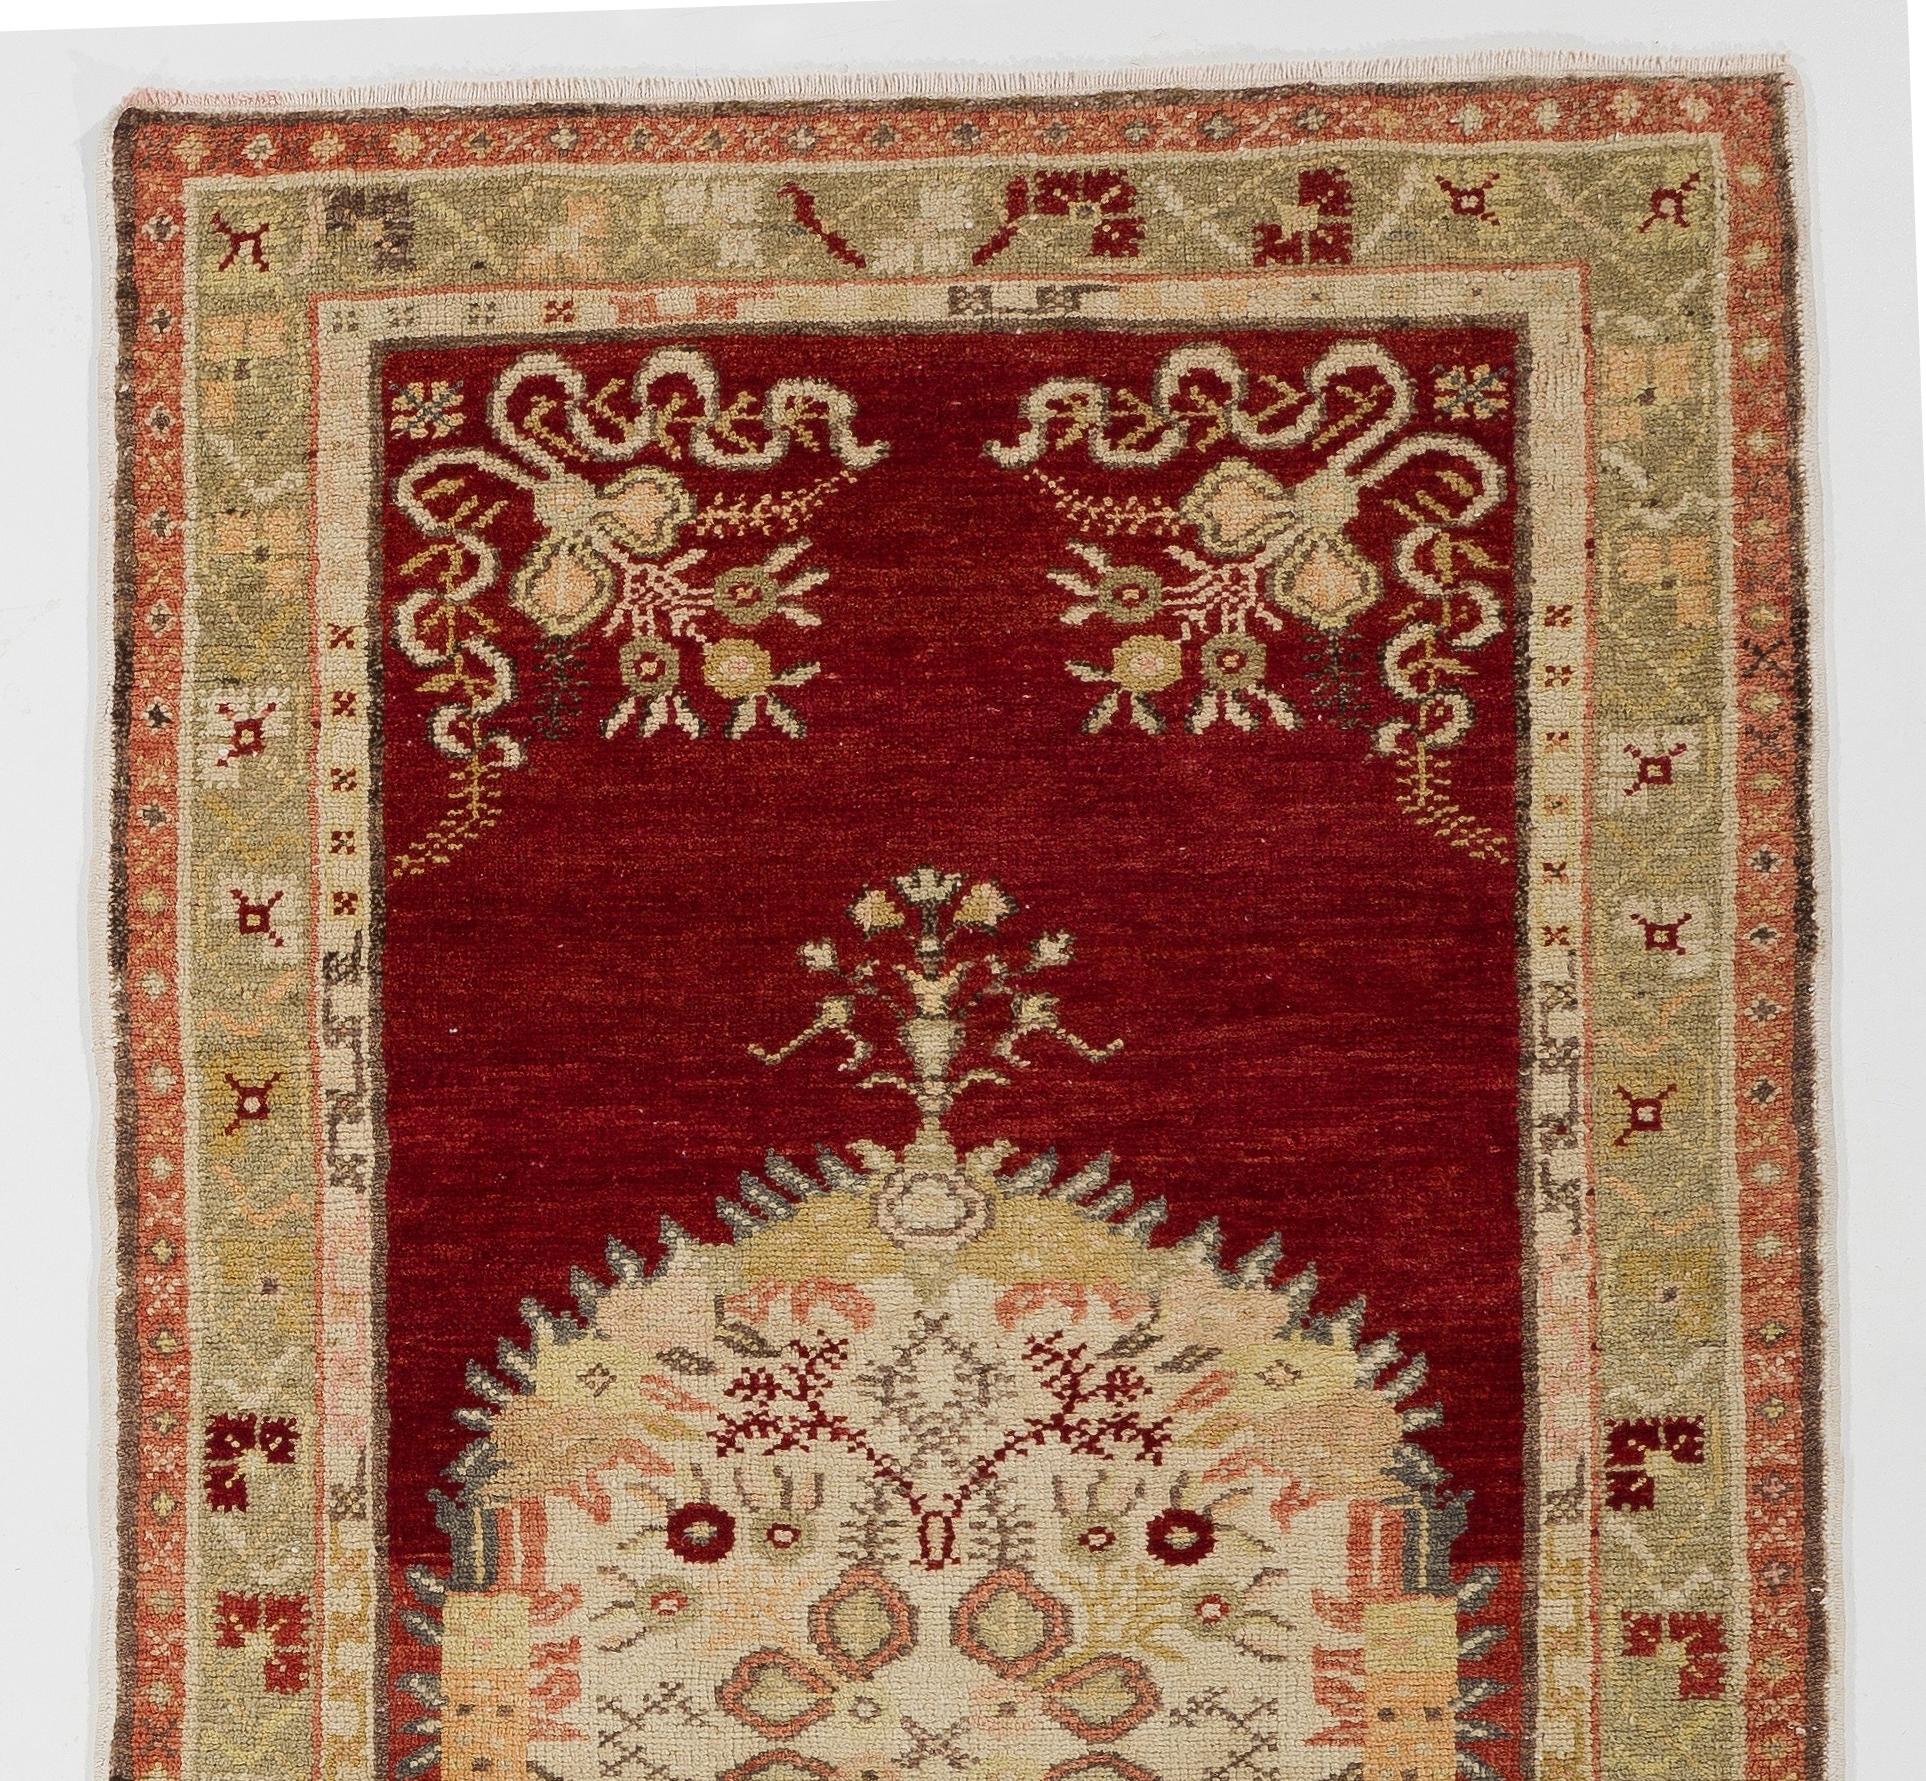 This vintage hand knotted Turkish accent rug boasts a large elliptical medallion at its centre in ivory, pale yellow, light olive green, soft orange and salmon pink. It is decorated with stylized florals against a deep, ruby red field that features